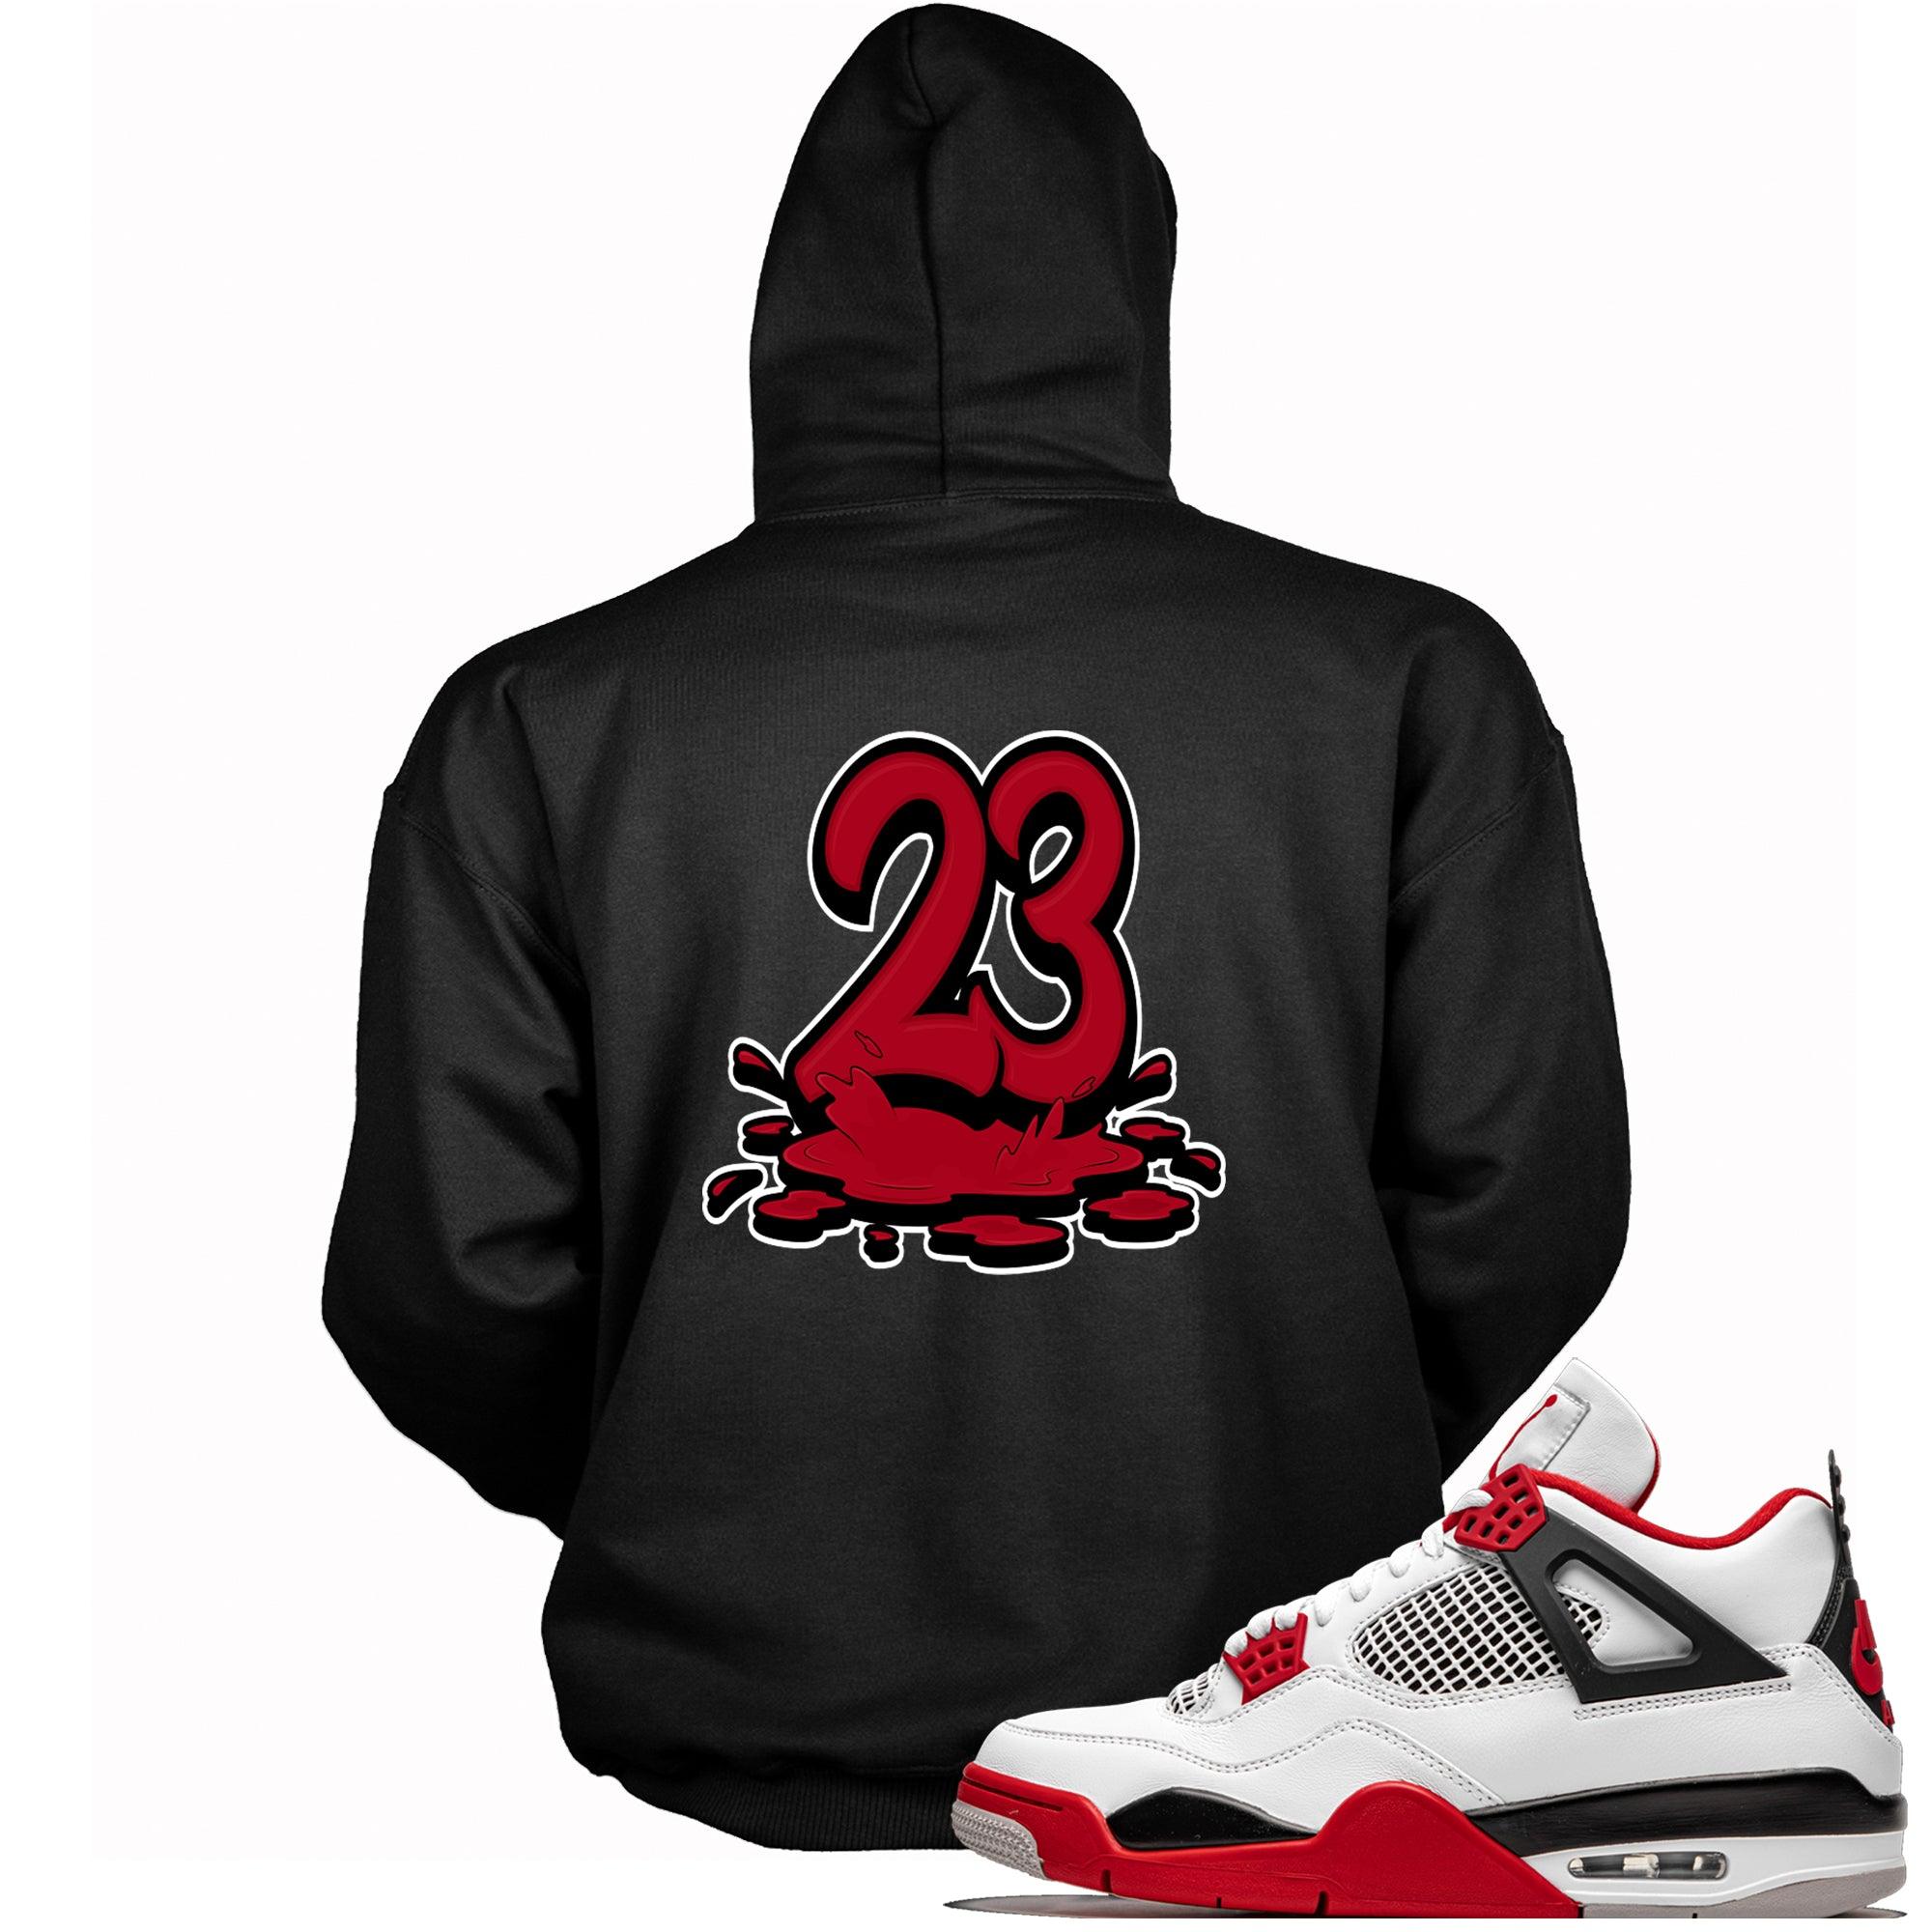 Number 23 Melting Hoodie AJ 4 Fire Red photo